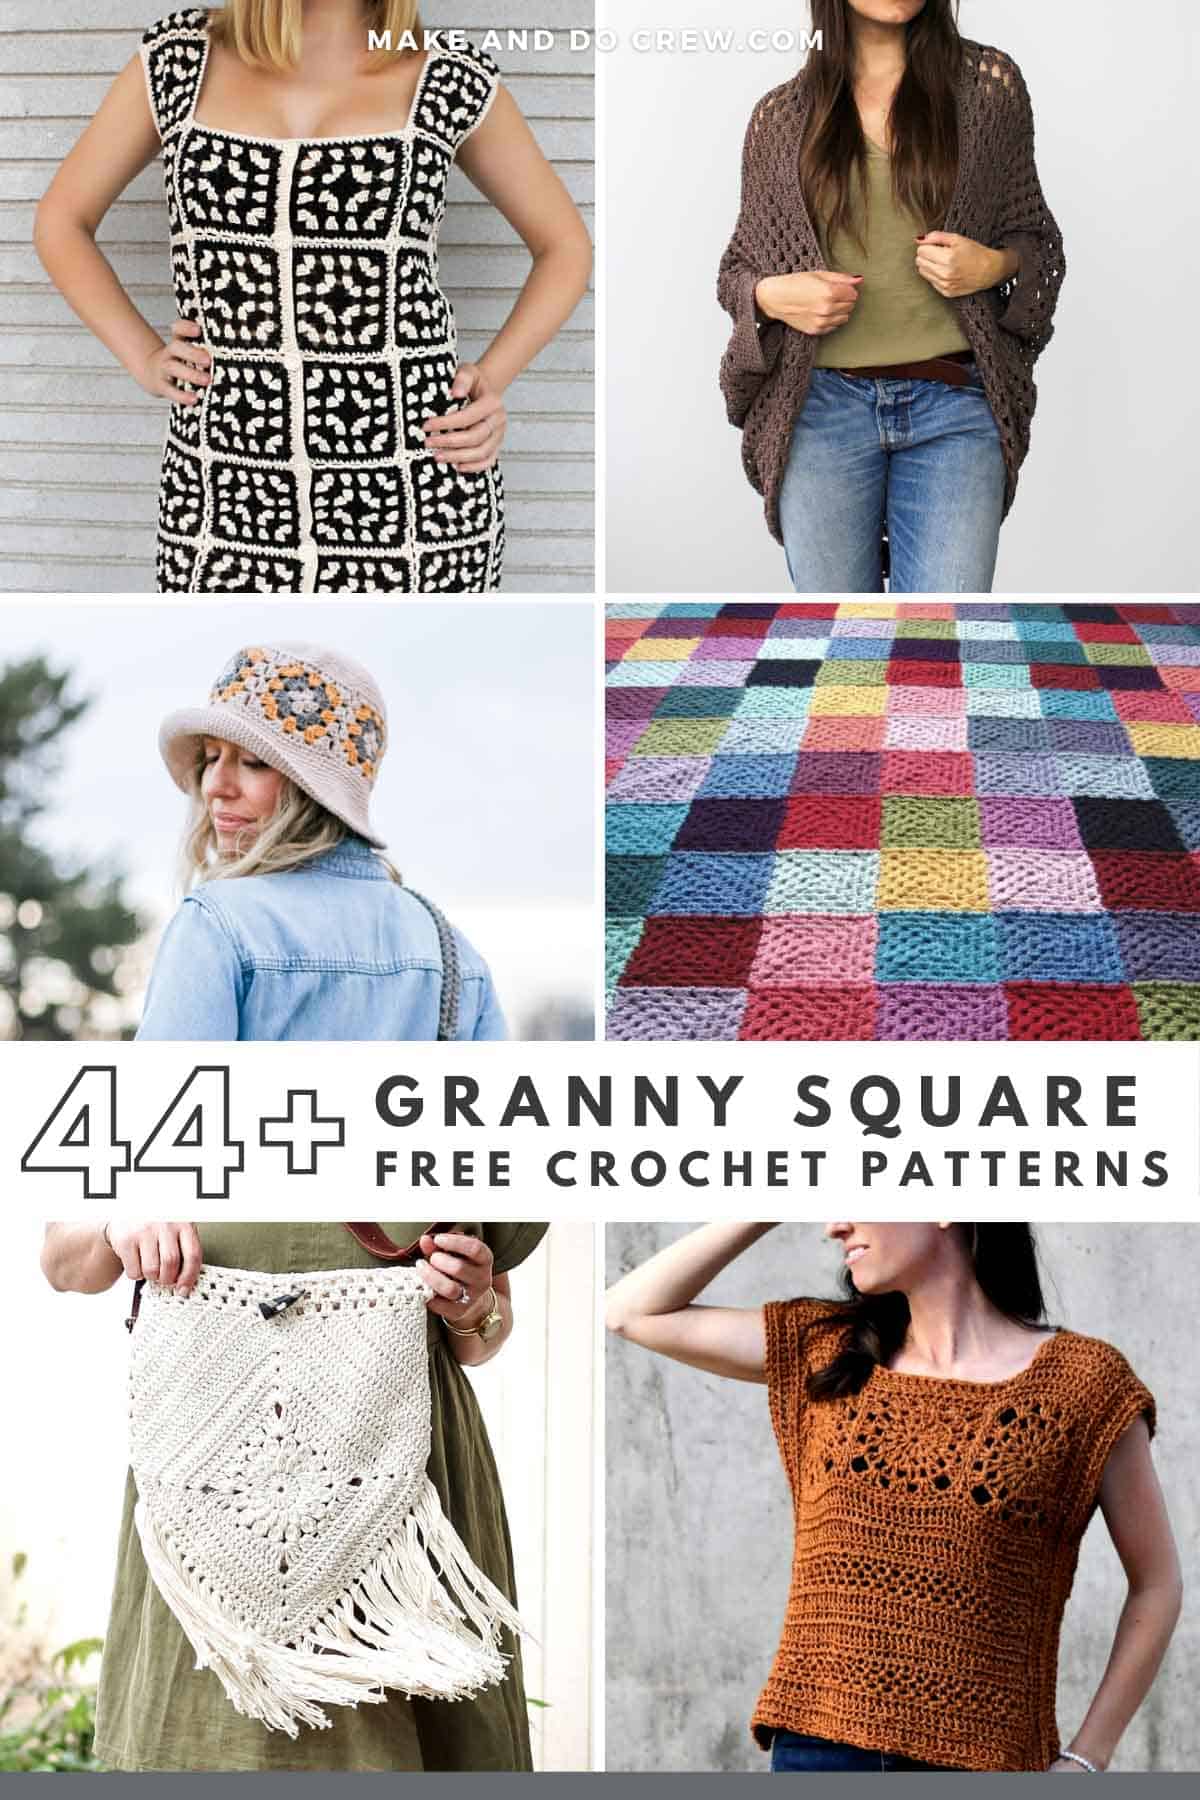 Granny Square Projects - 43 Patterns You'll Love    Make & Do Crew